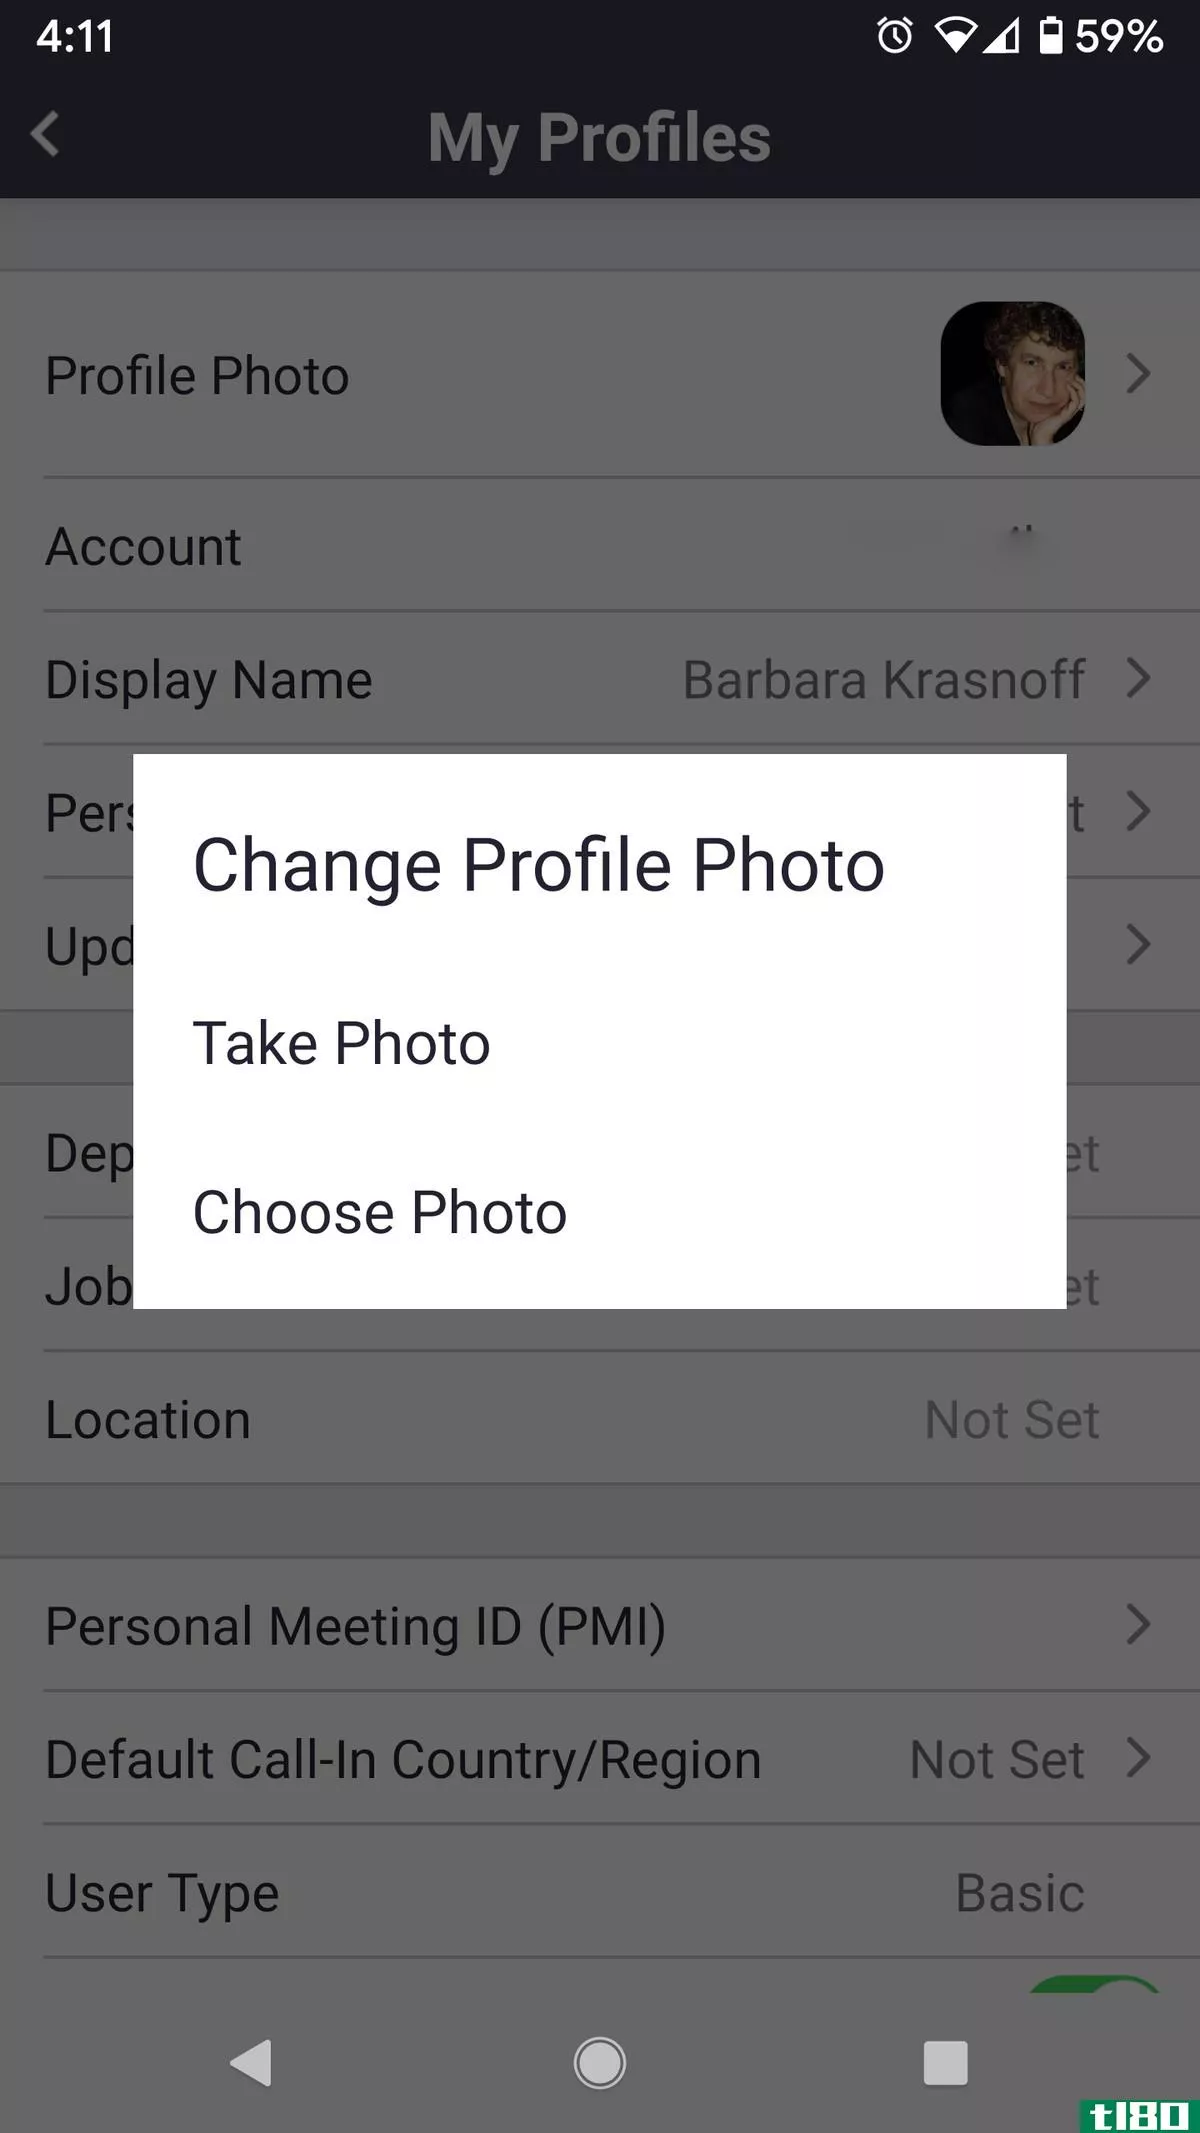 You can also change your profile photo in the pop-up window.